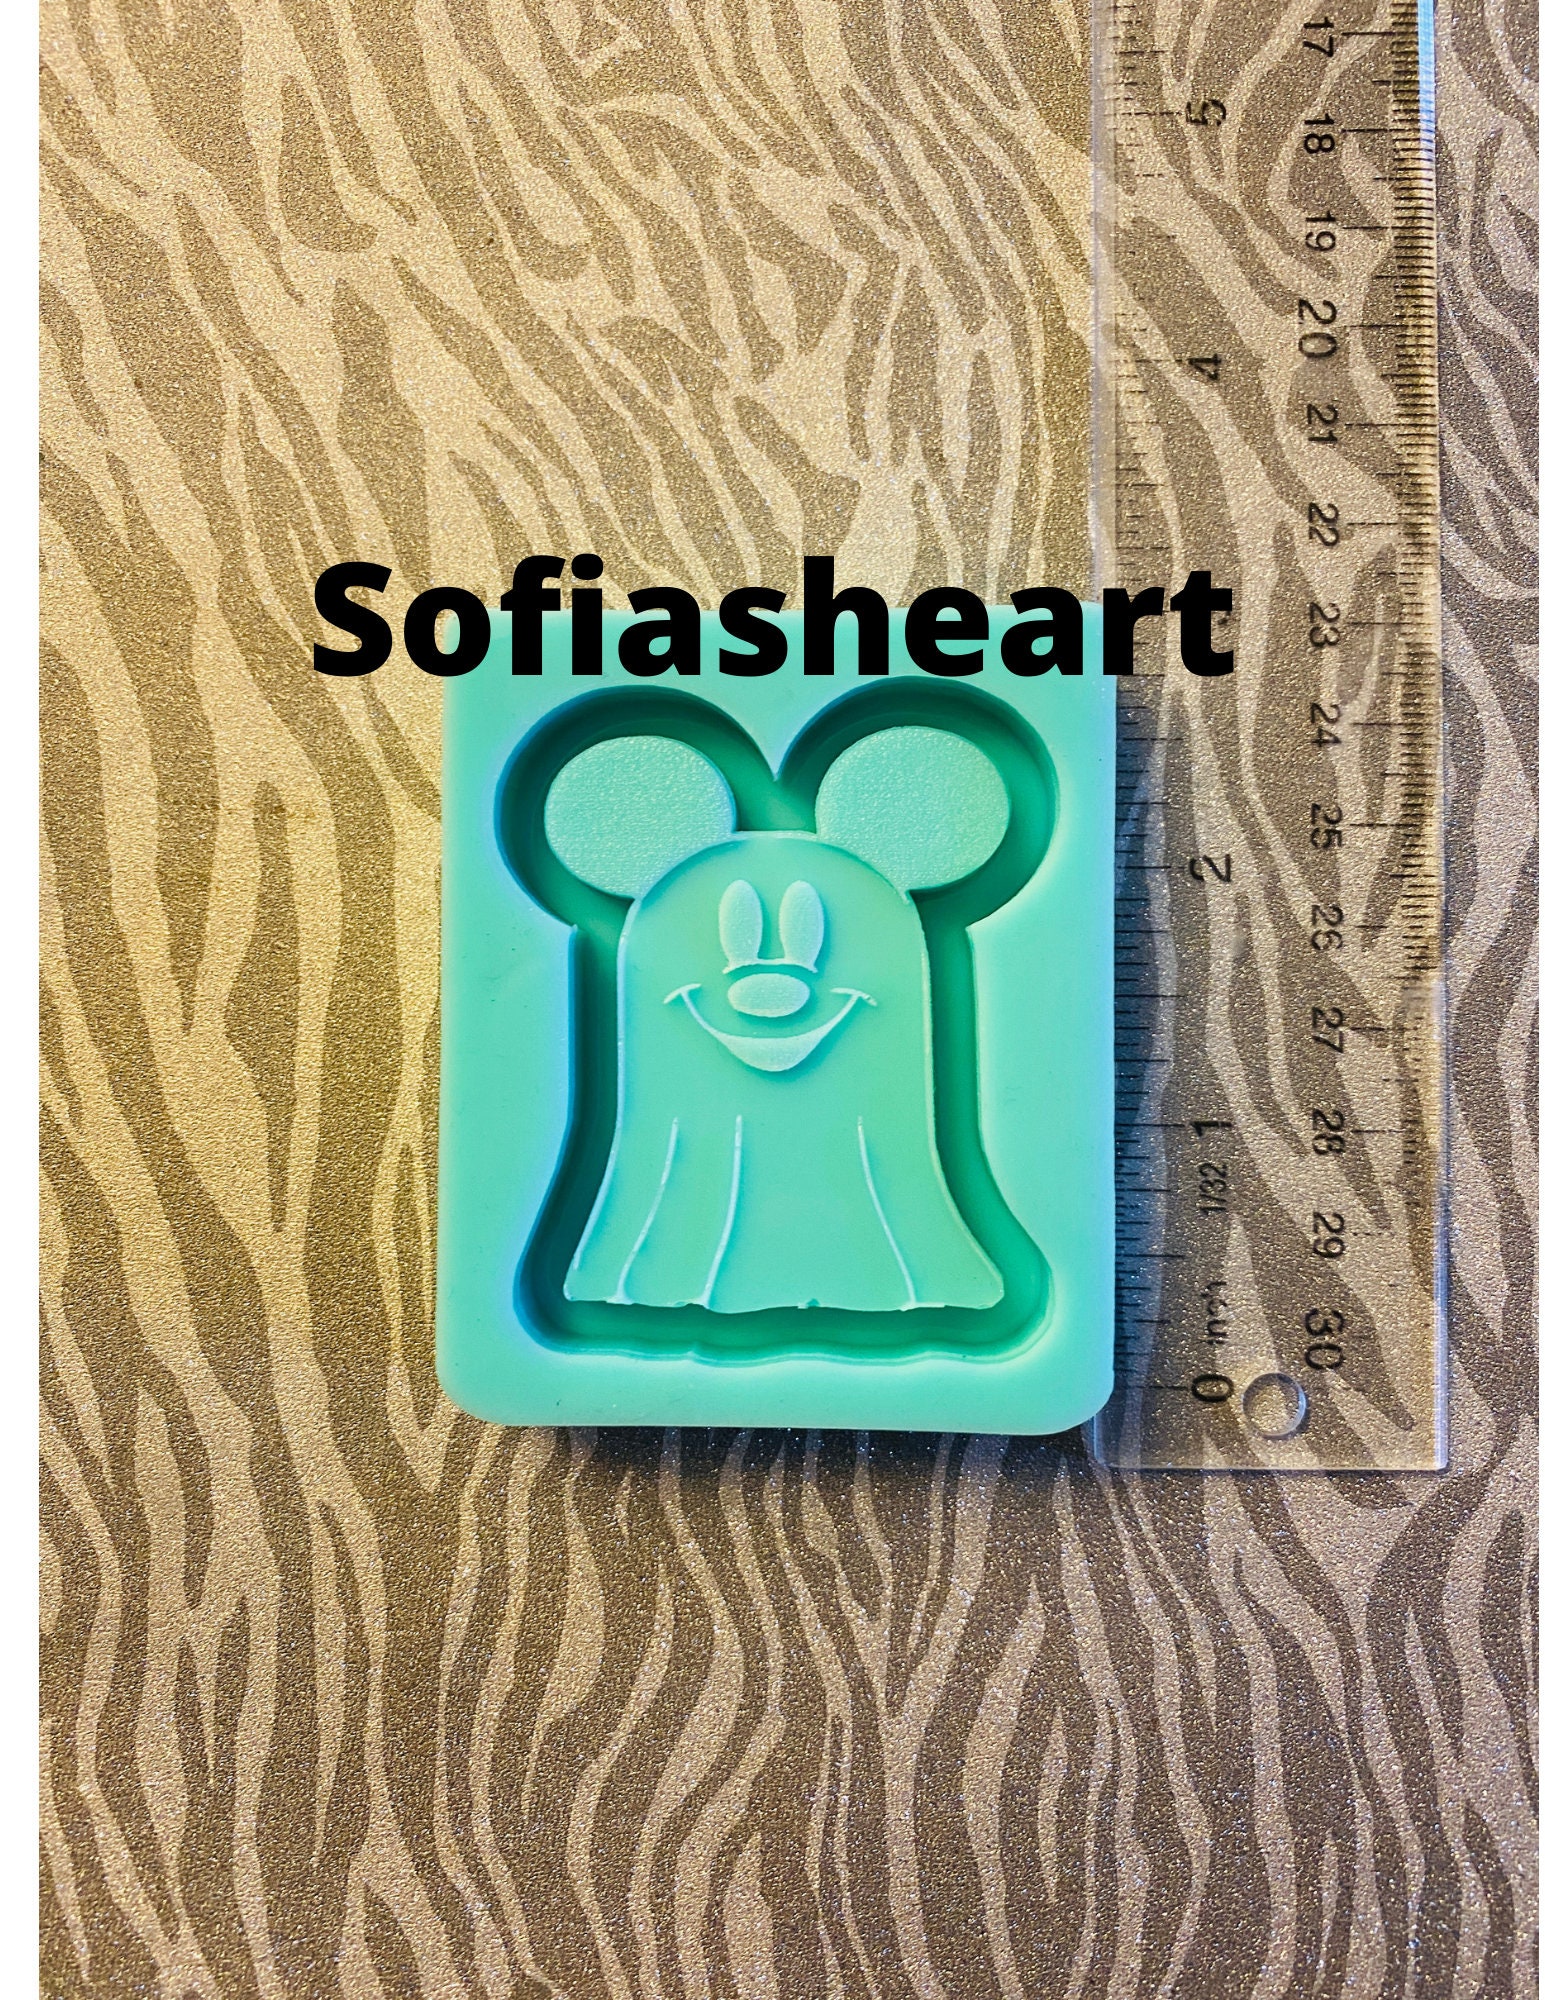 Mickey Mouse Quicksand Resin Shaker Molds, Castle Silicone Molds, Disney  Molds, Resin Keychain Accessories, Silicone Molds Supplies F160 